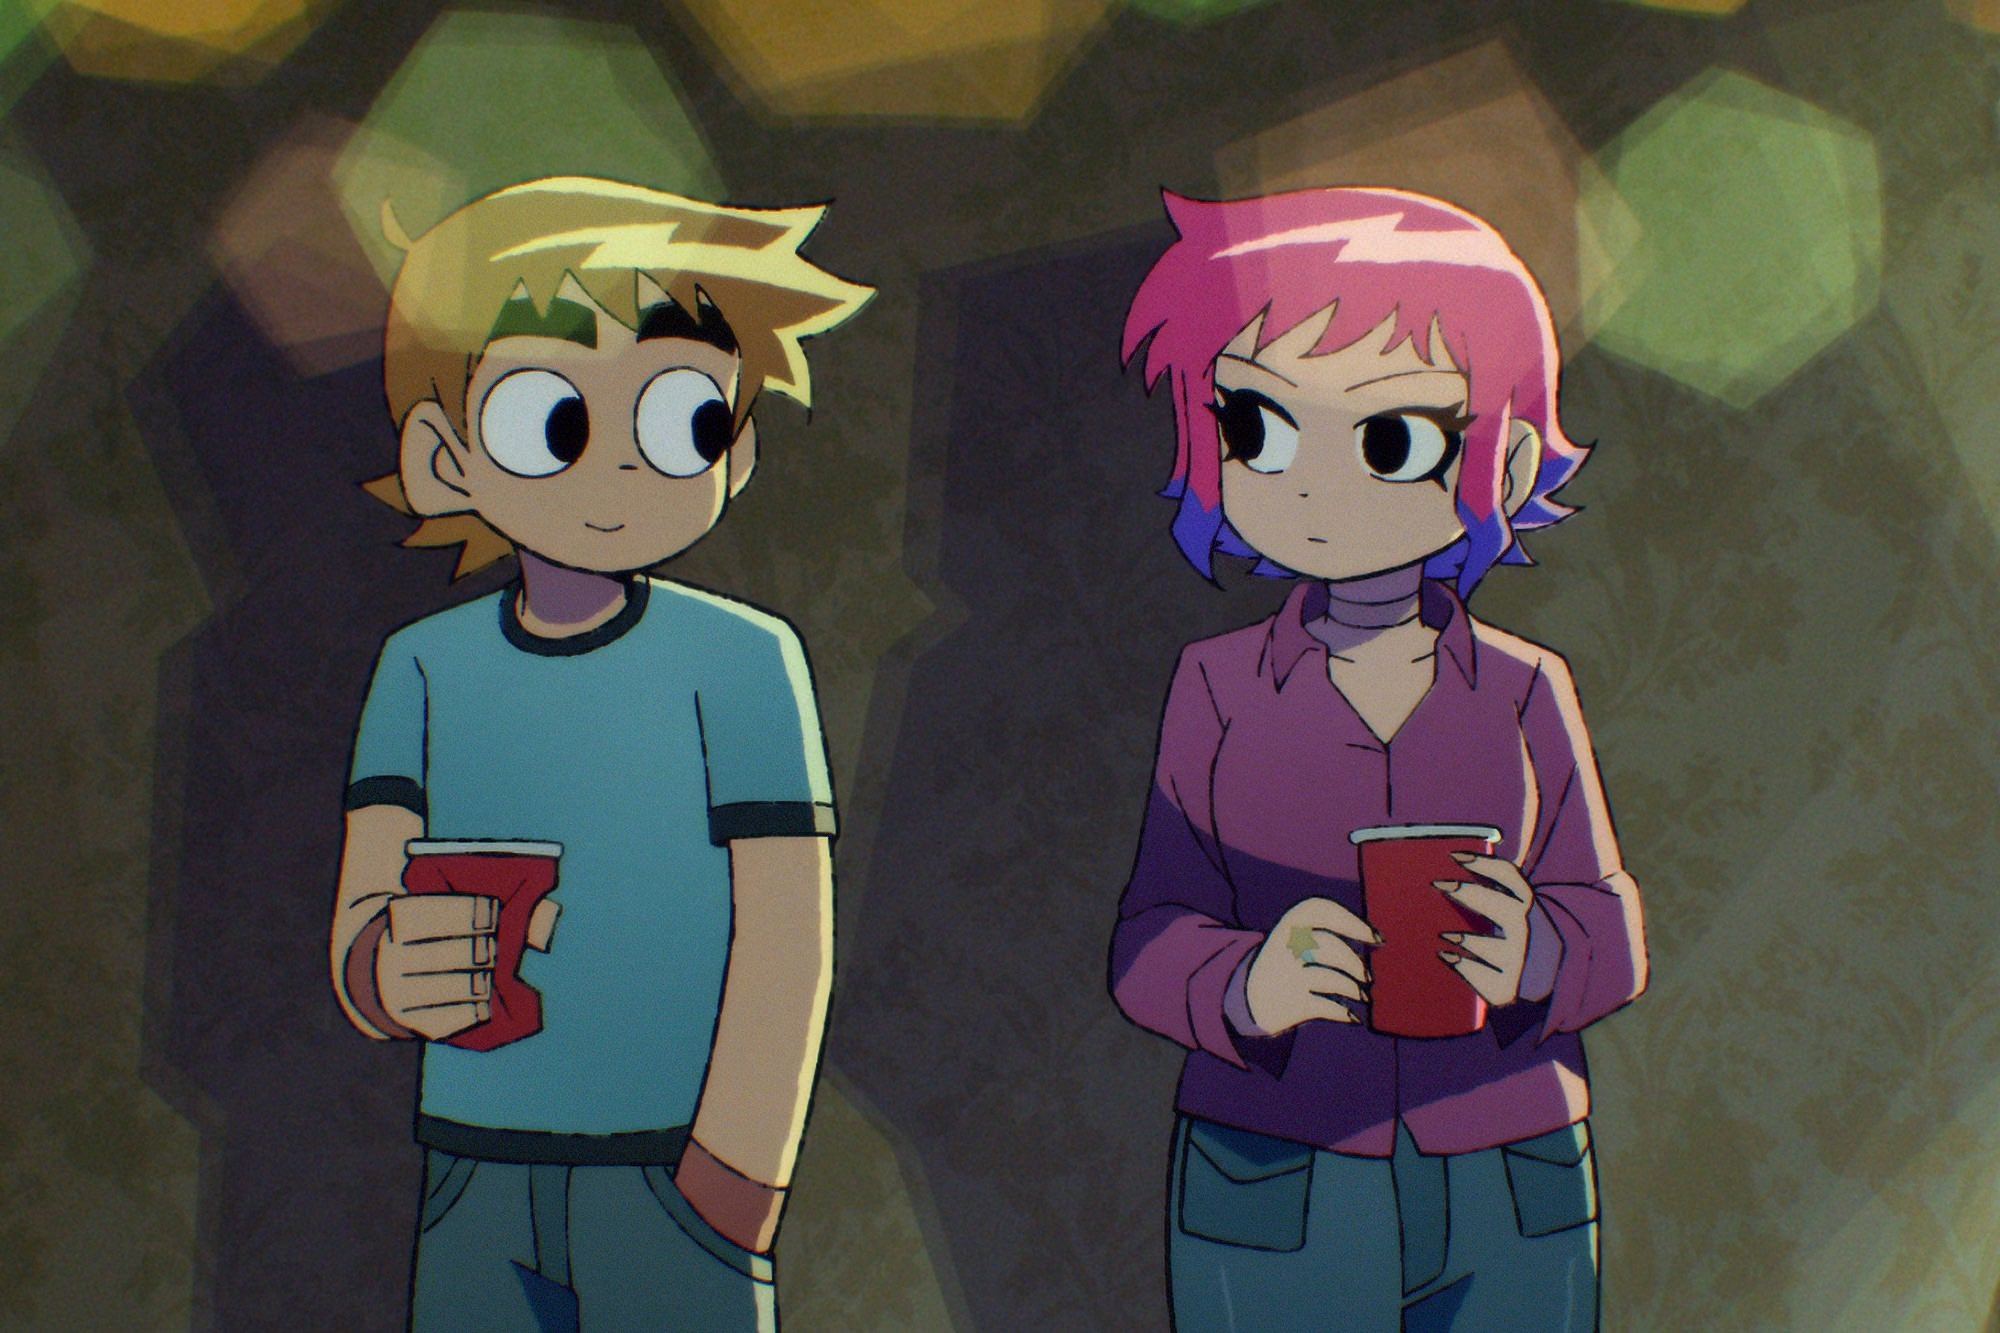 HD wallpaper featuring animated characters Scott Pilgrim and Ramona Flowers holding cups with a stylized background from Scott Pilgrim Takes Off.